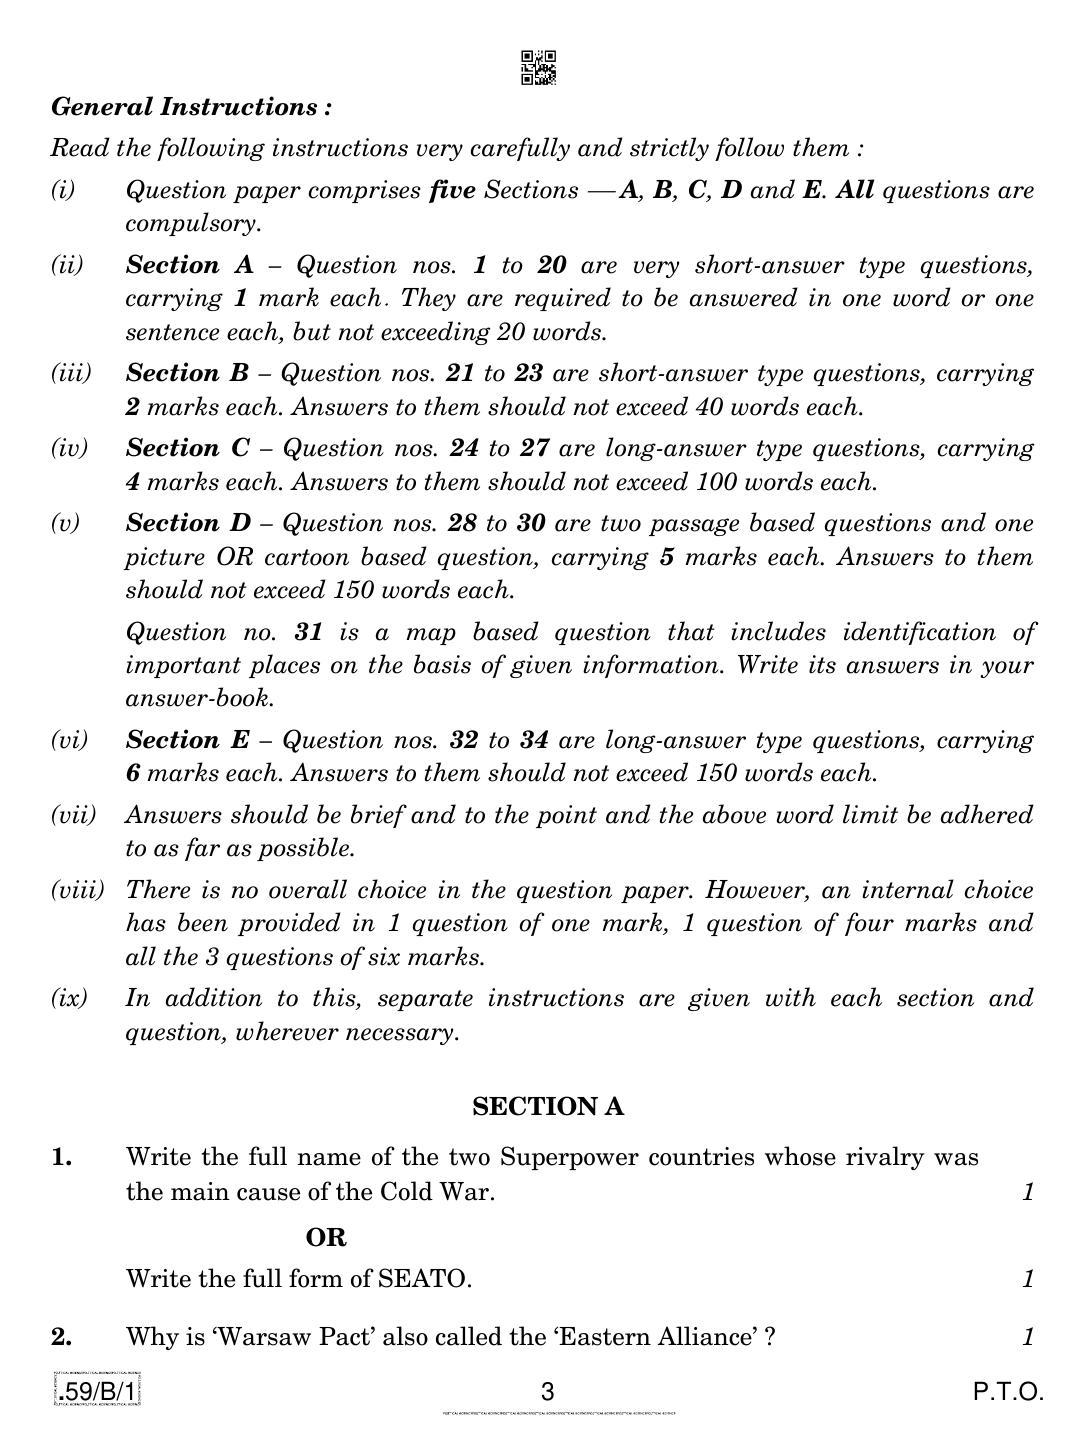 CBSE Class 12 59-C-1 - Political Science 2020 Compartment Question Paper - Page 3